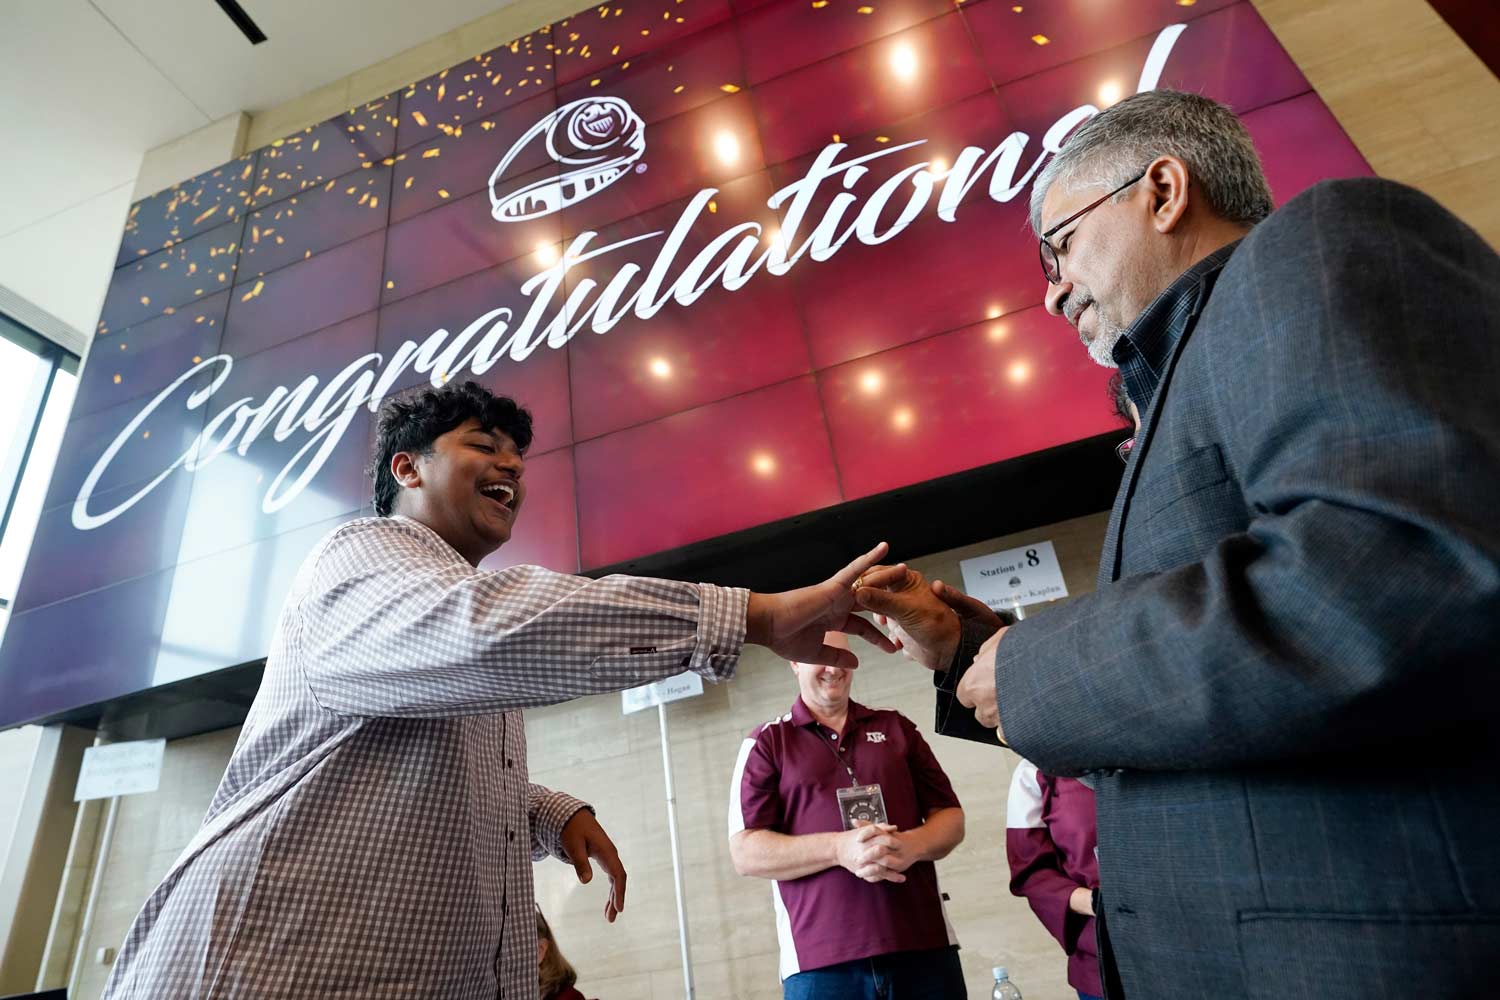 A father presents an aggie ring to his son on ring day